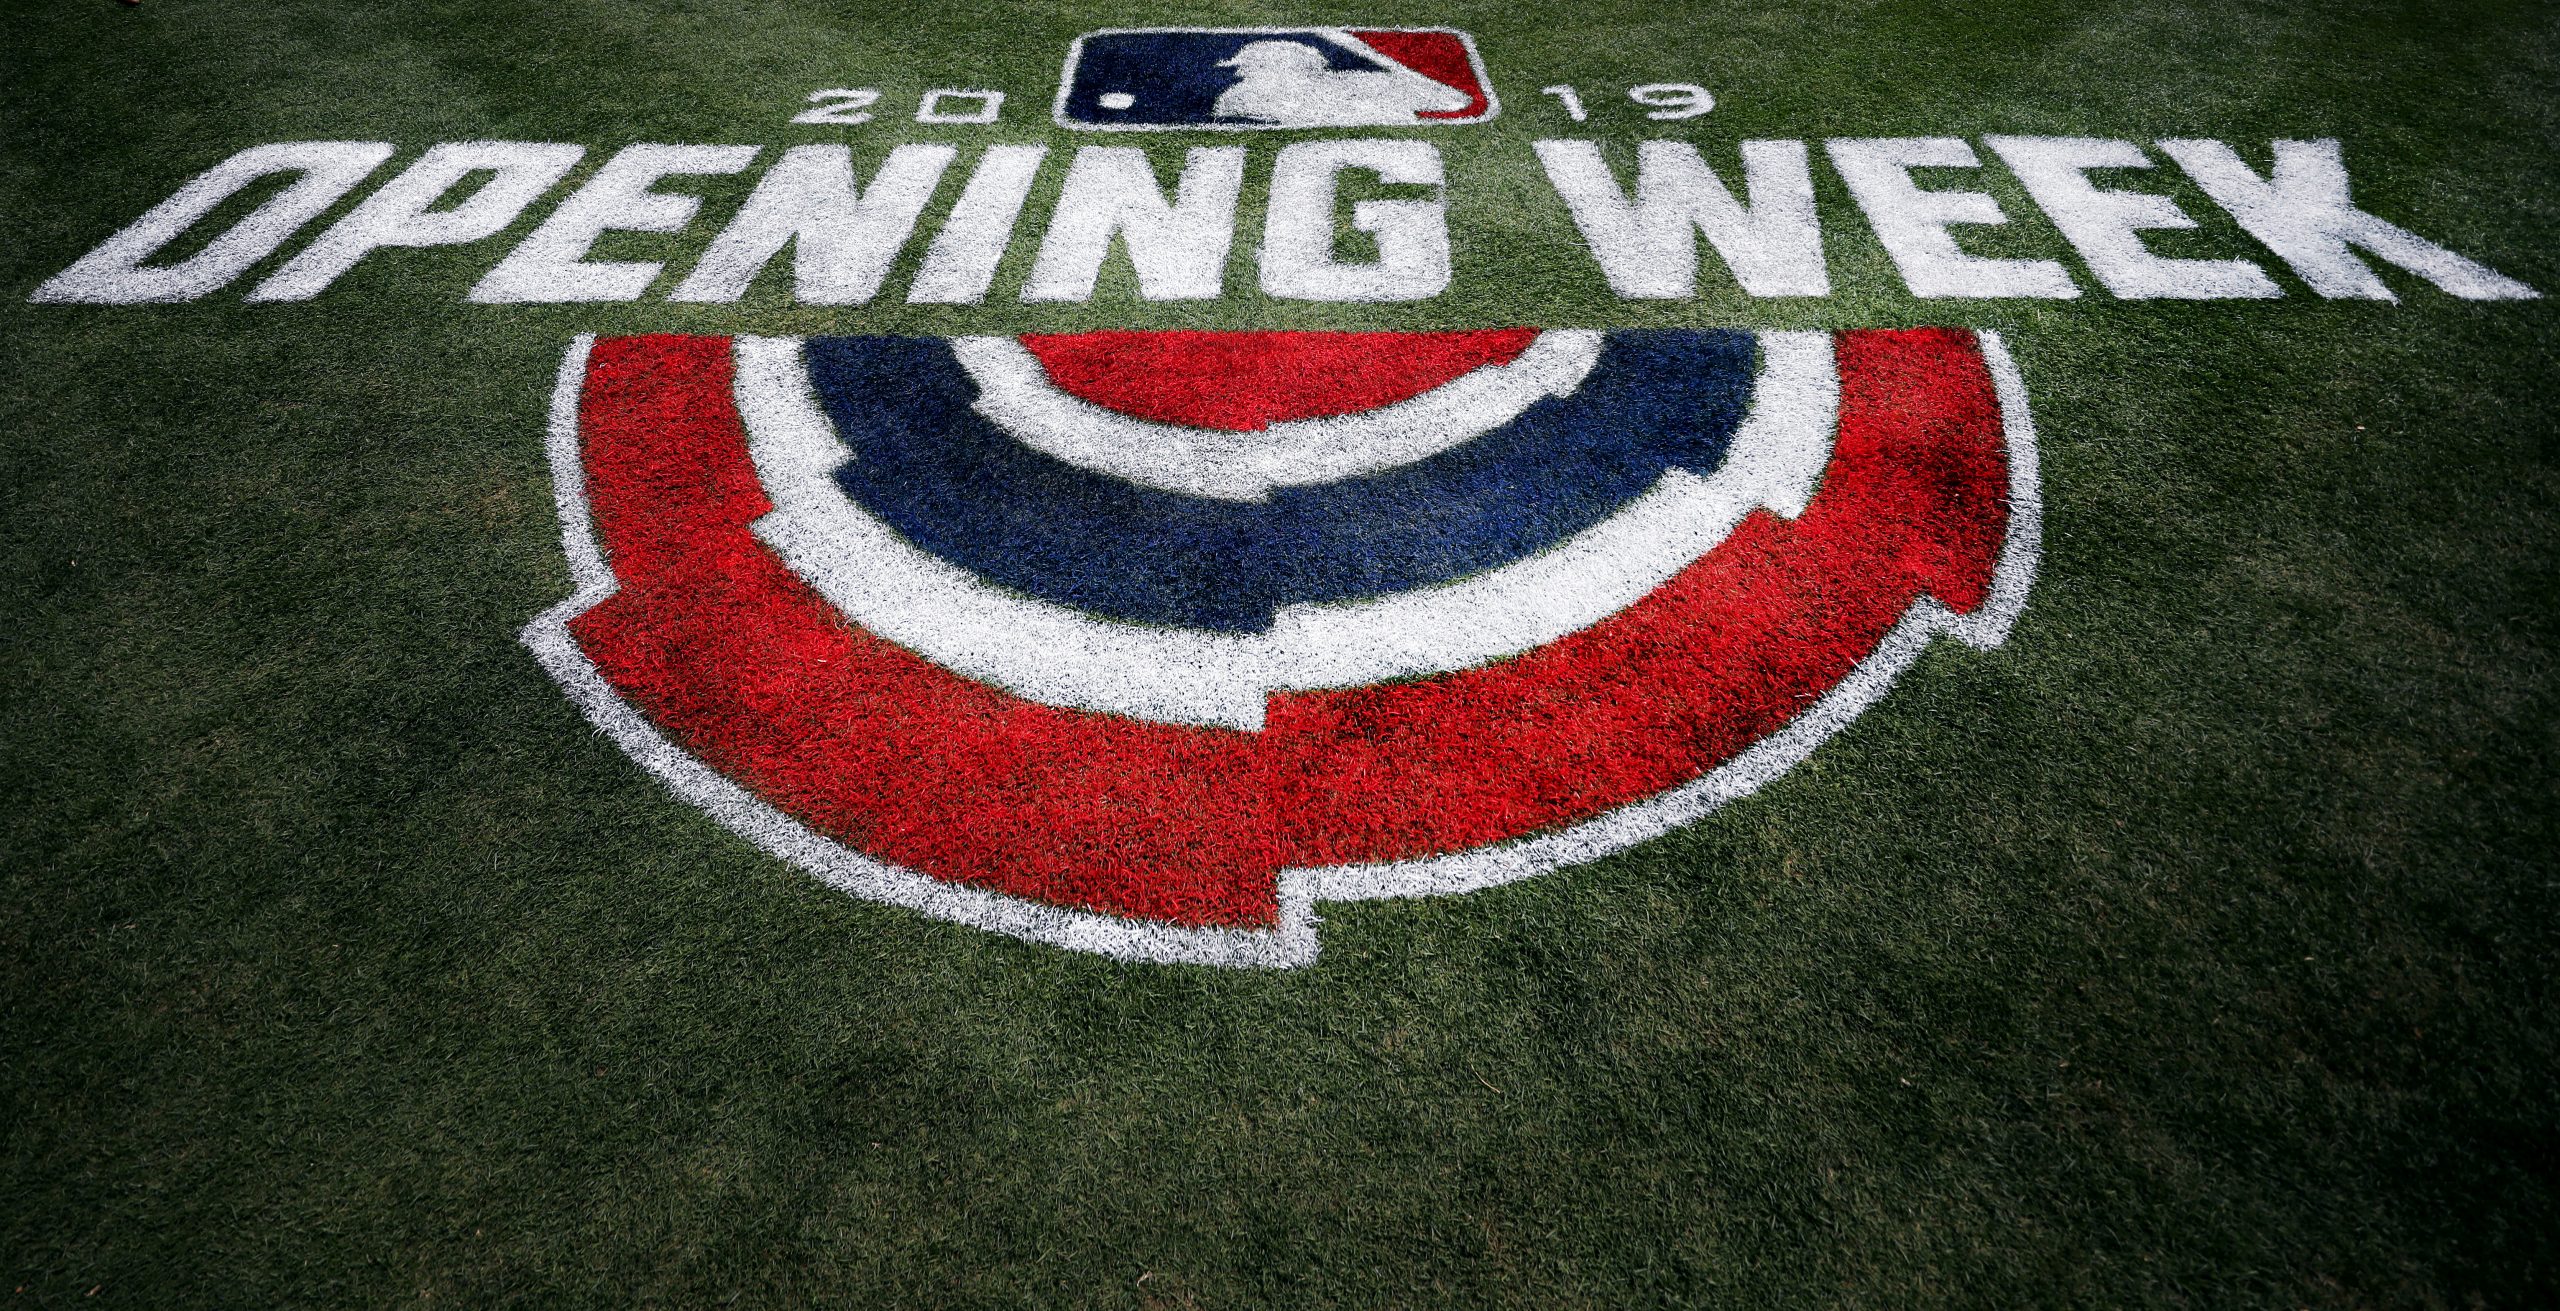 ARLINGTON, TEXAS - MARCH 28: A view of the Opening Week logo on the field prior to the Texas Ranger...